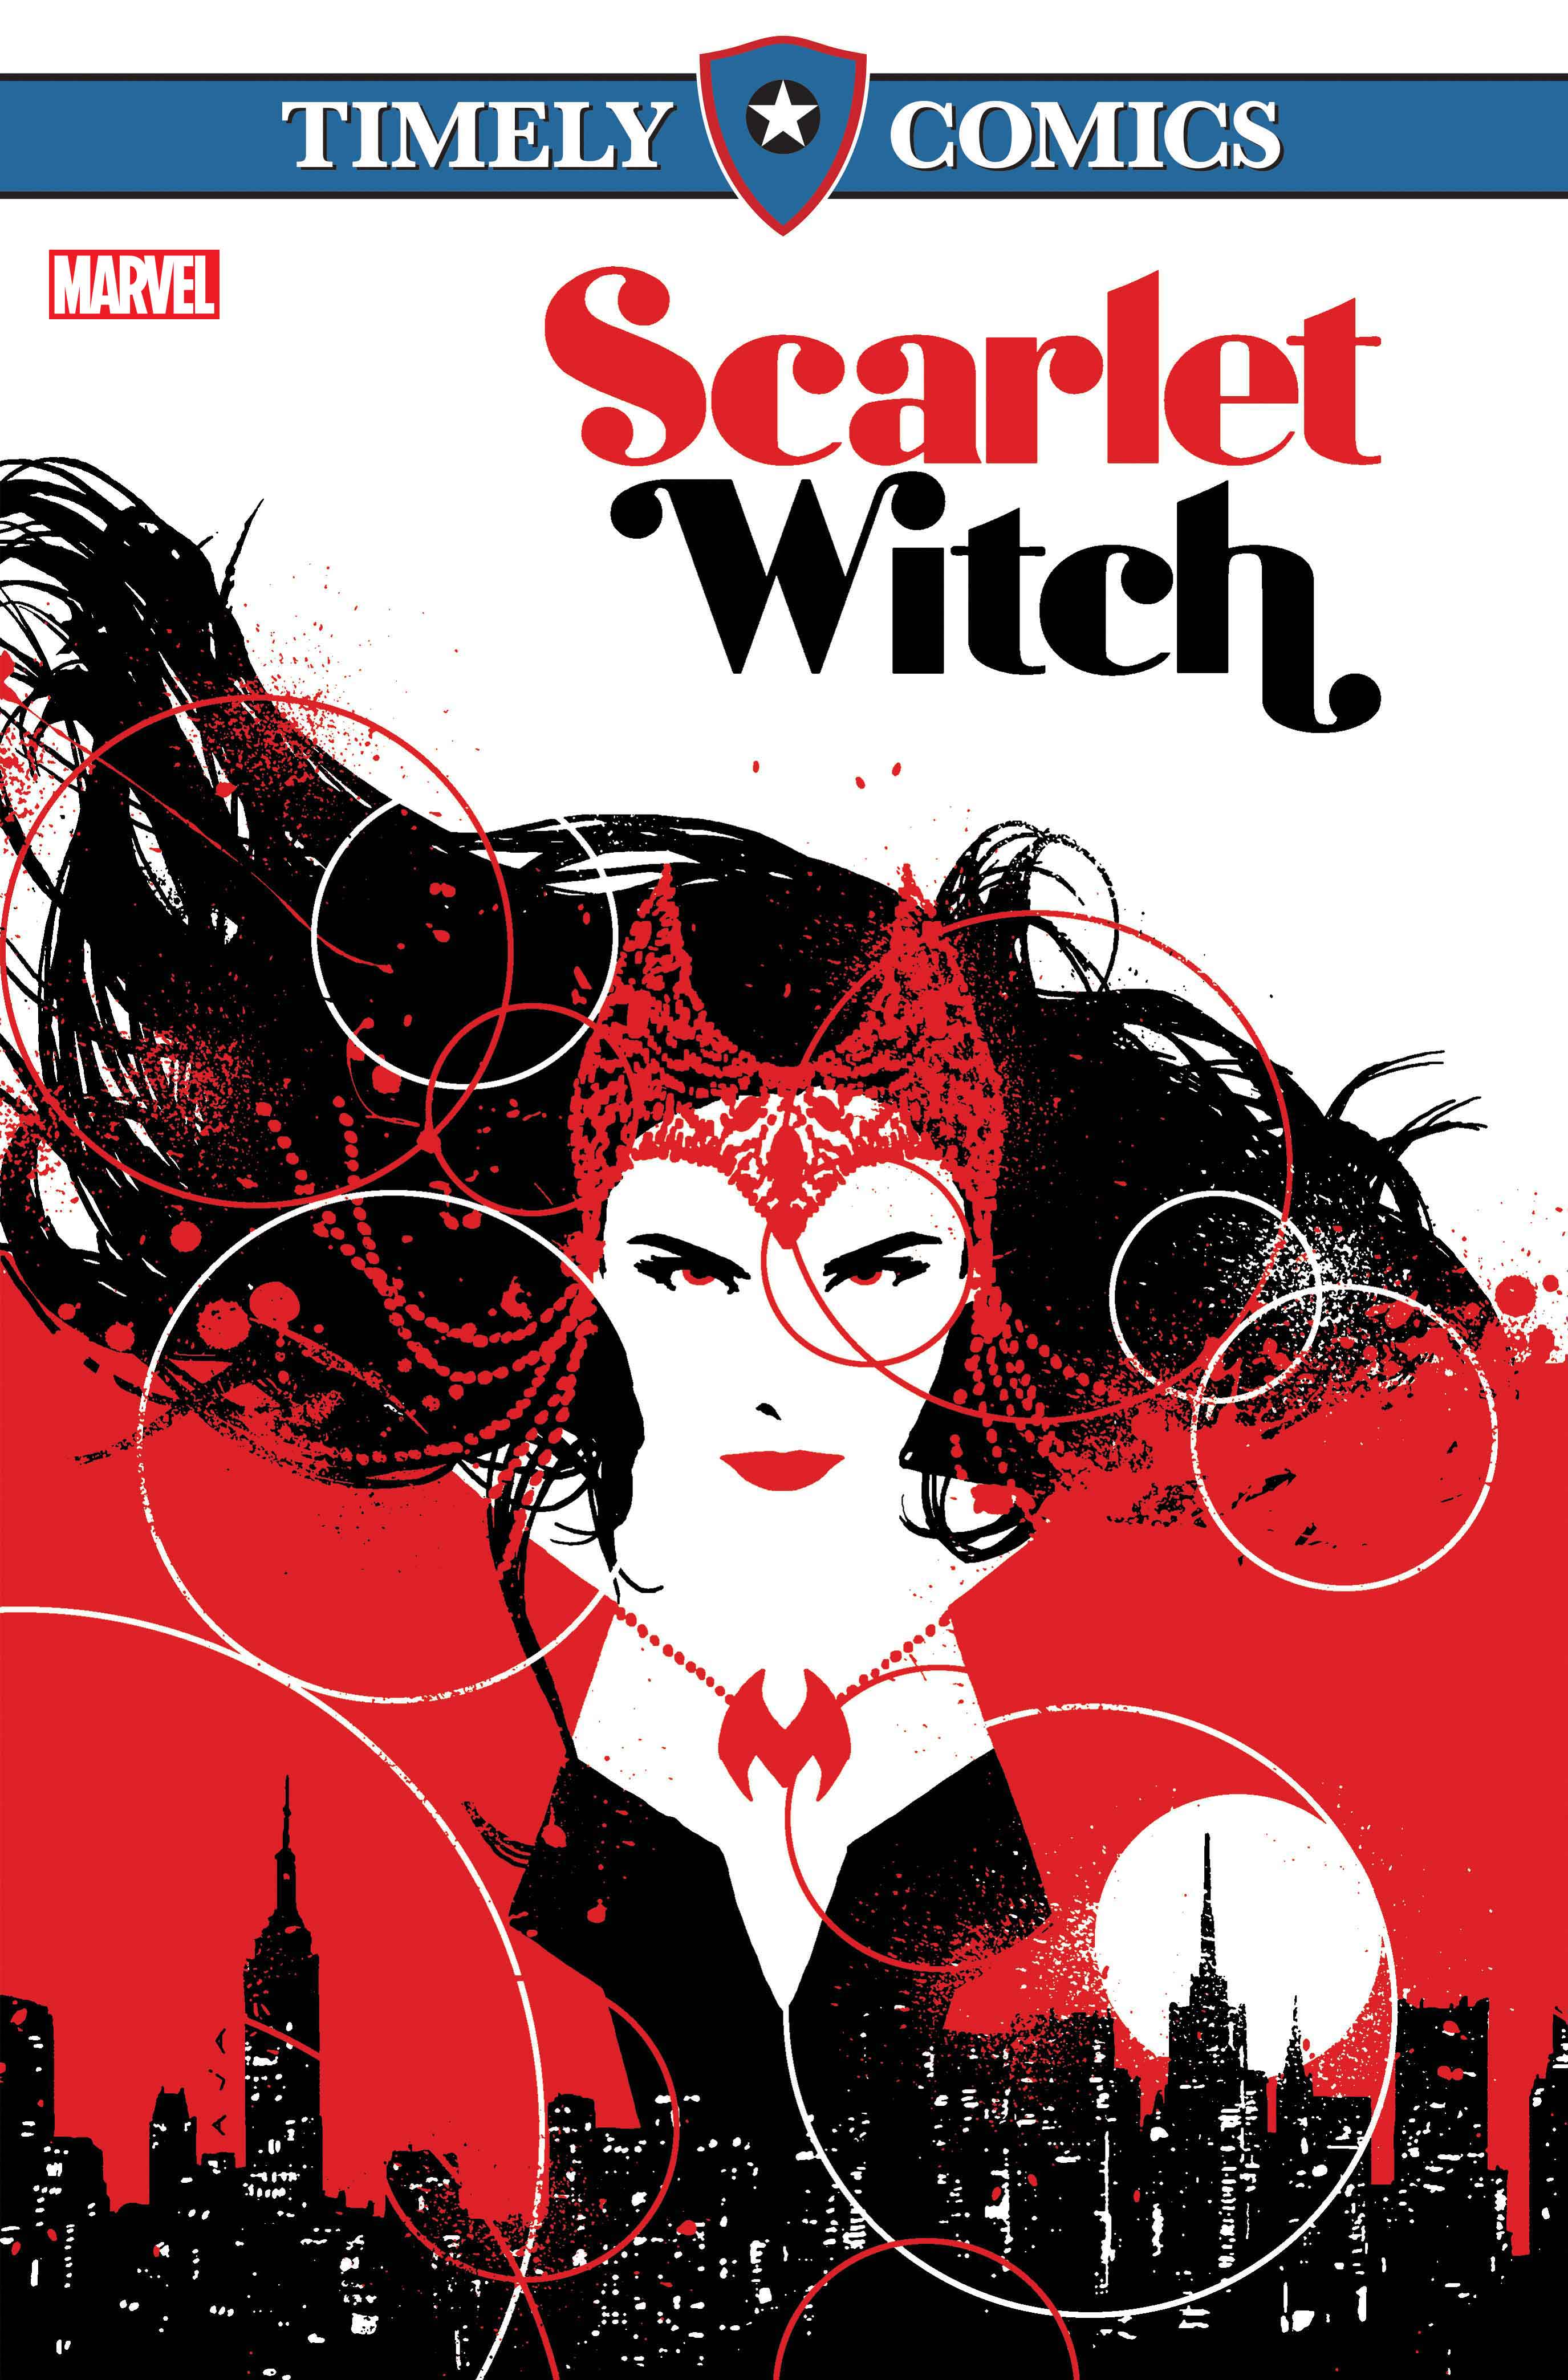 Timely_Comics_Scarlet_Witch